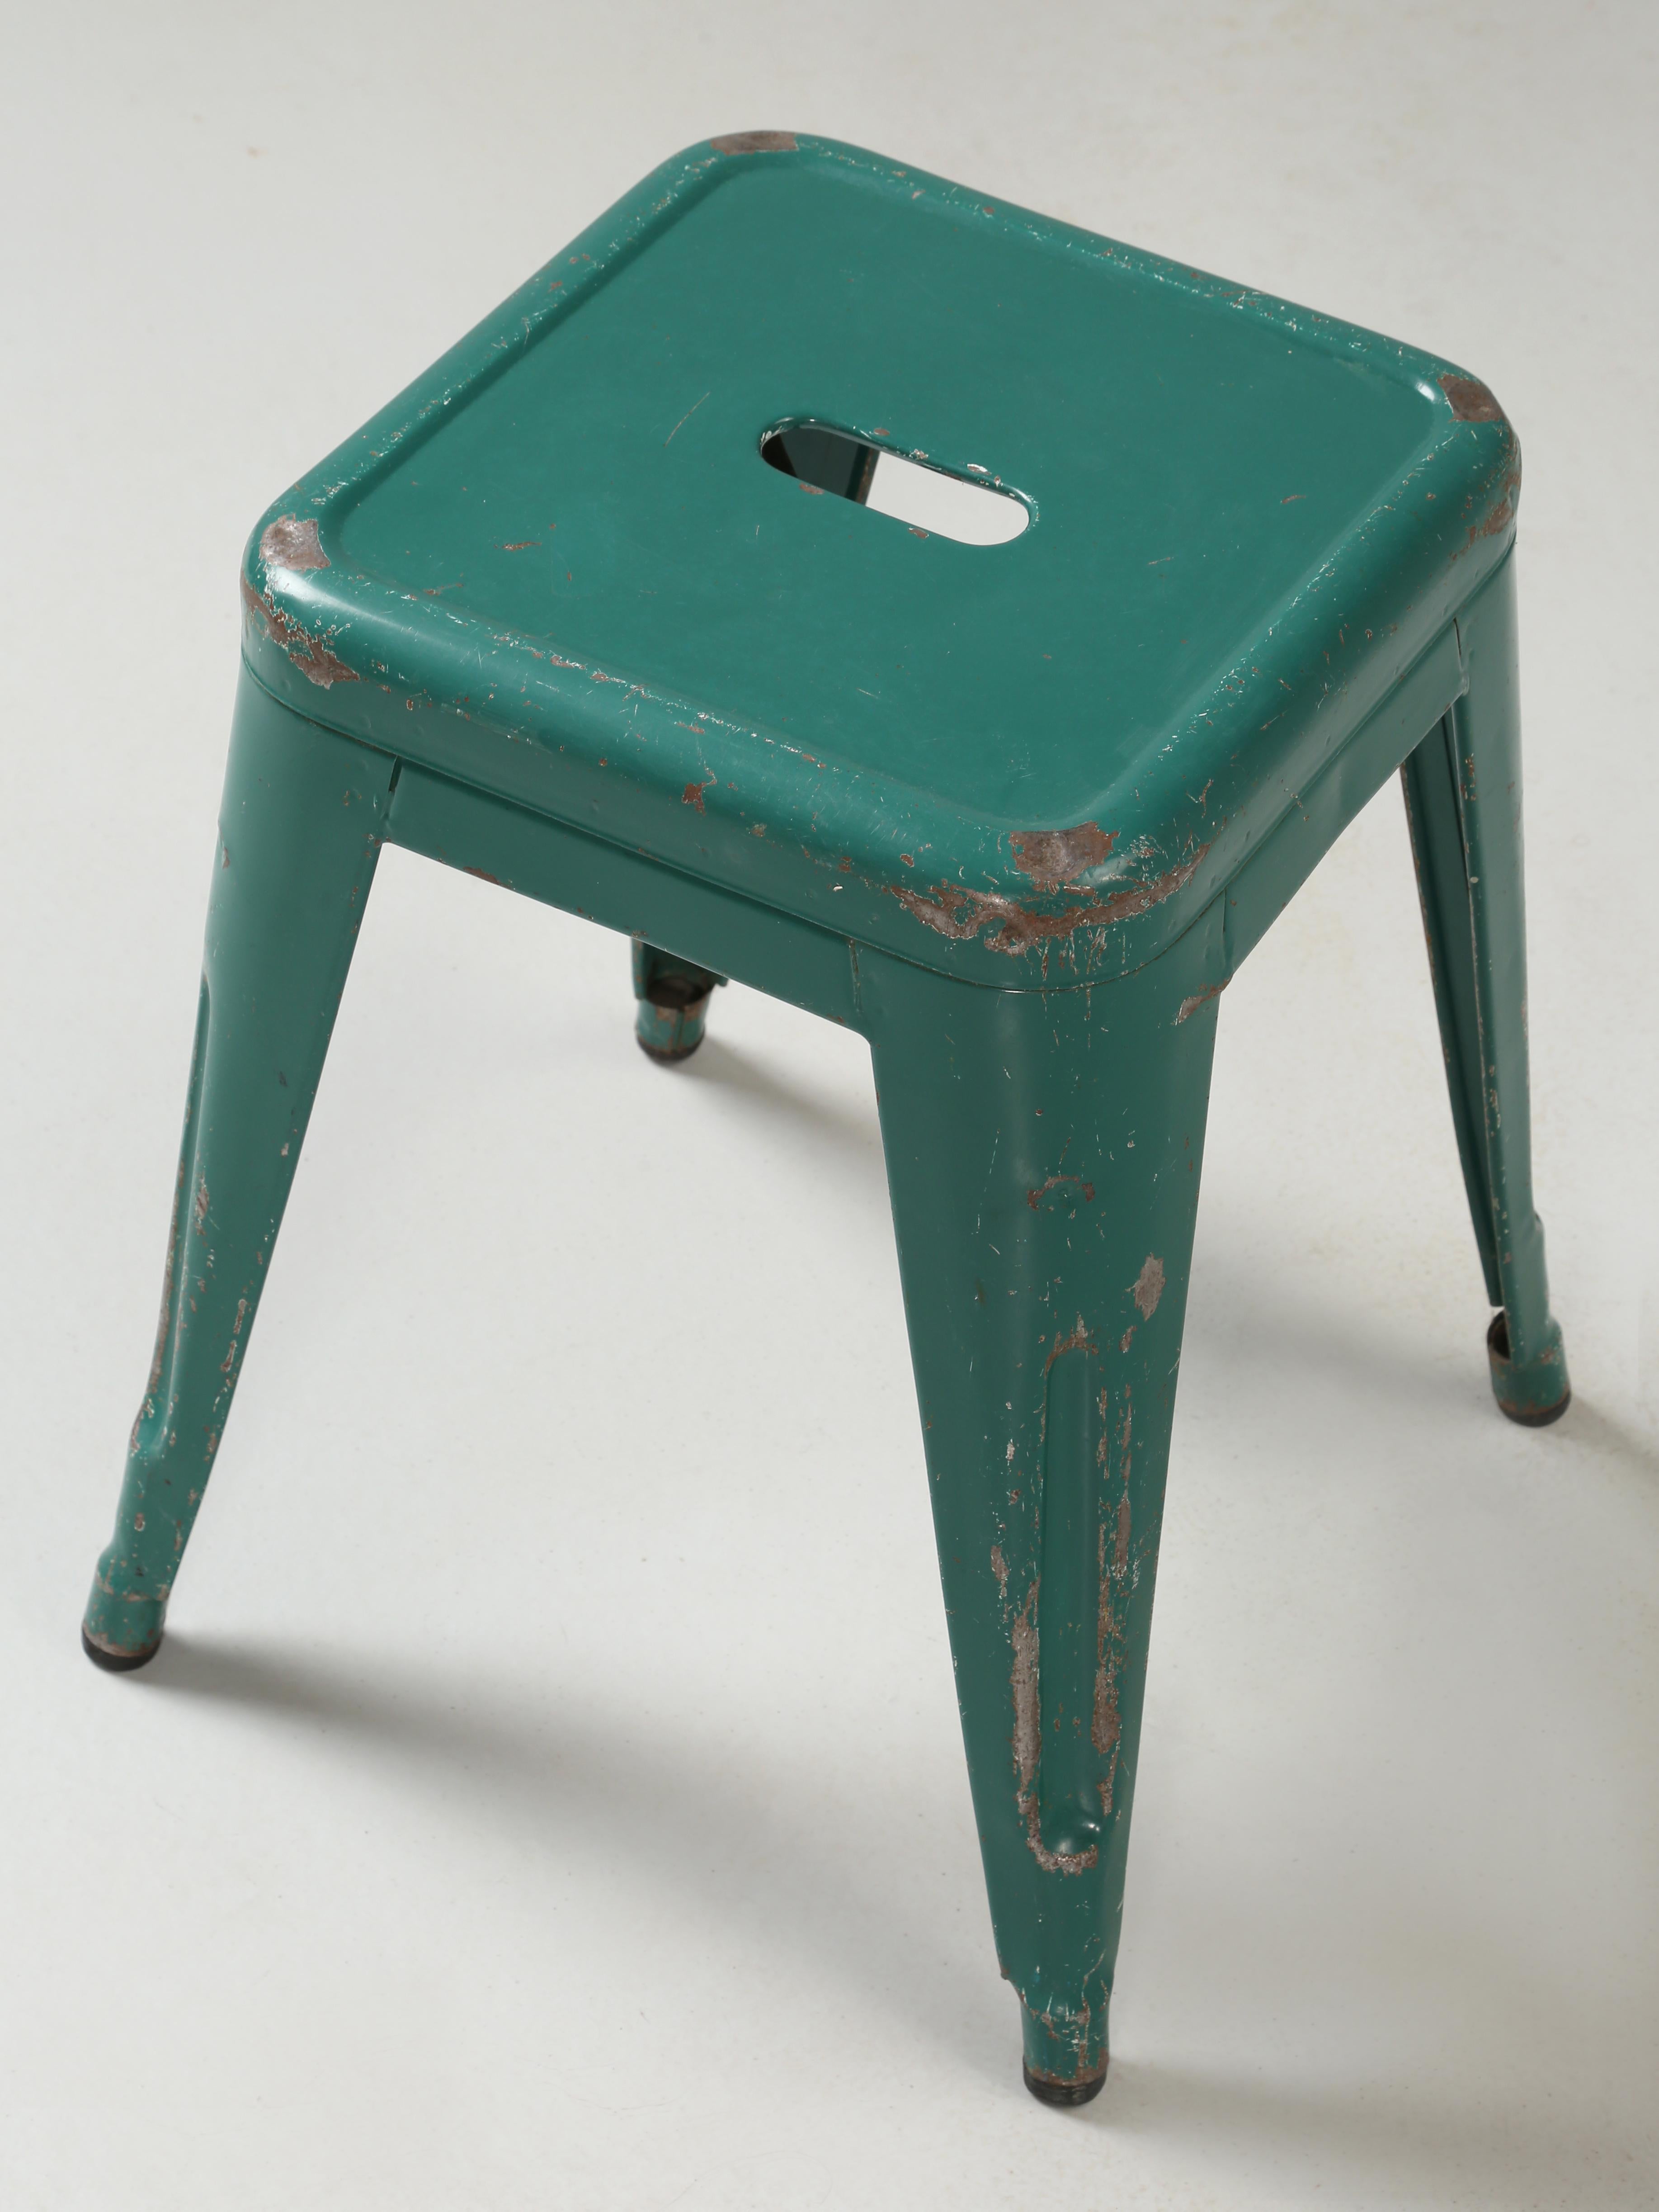 Industrial Genuine Vintage French Tolix Stacking Stools, Set '4' Green Nice Patina, 1960's